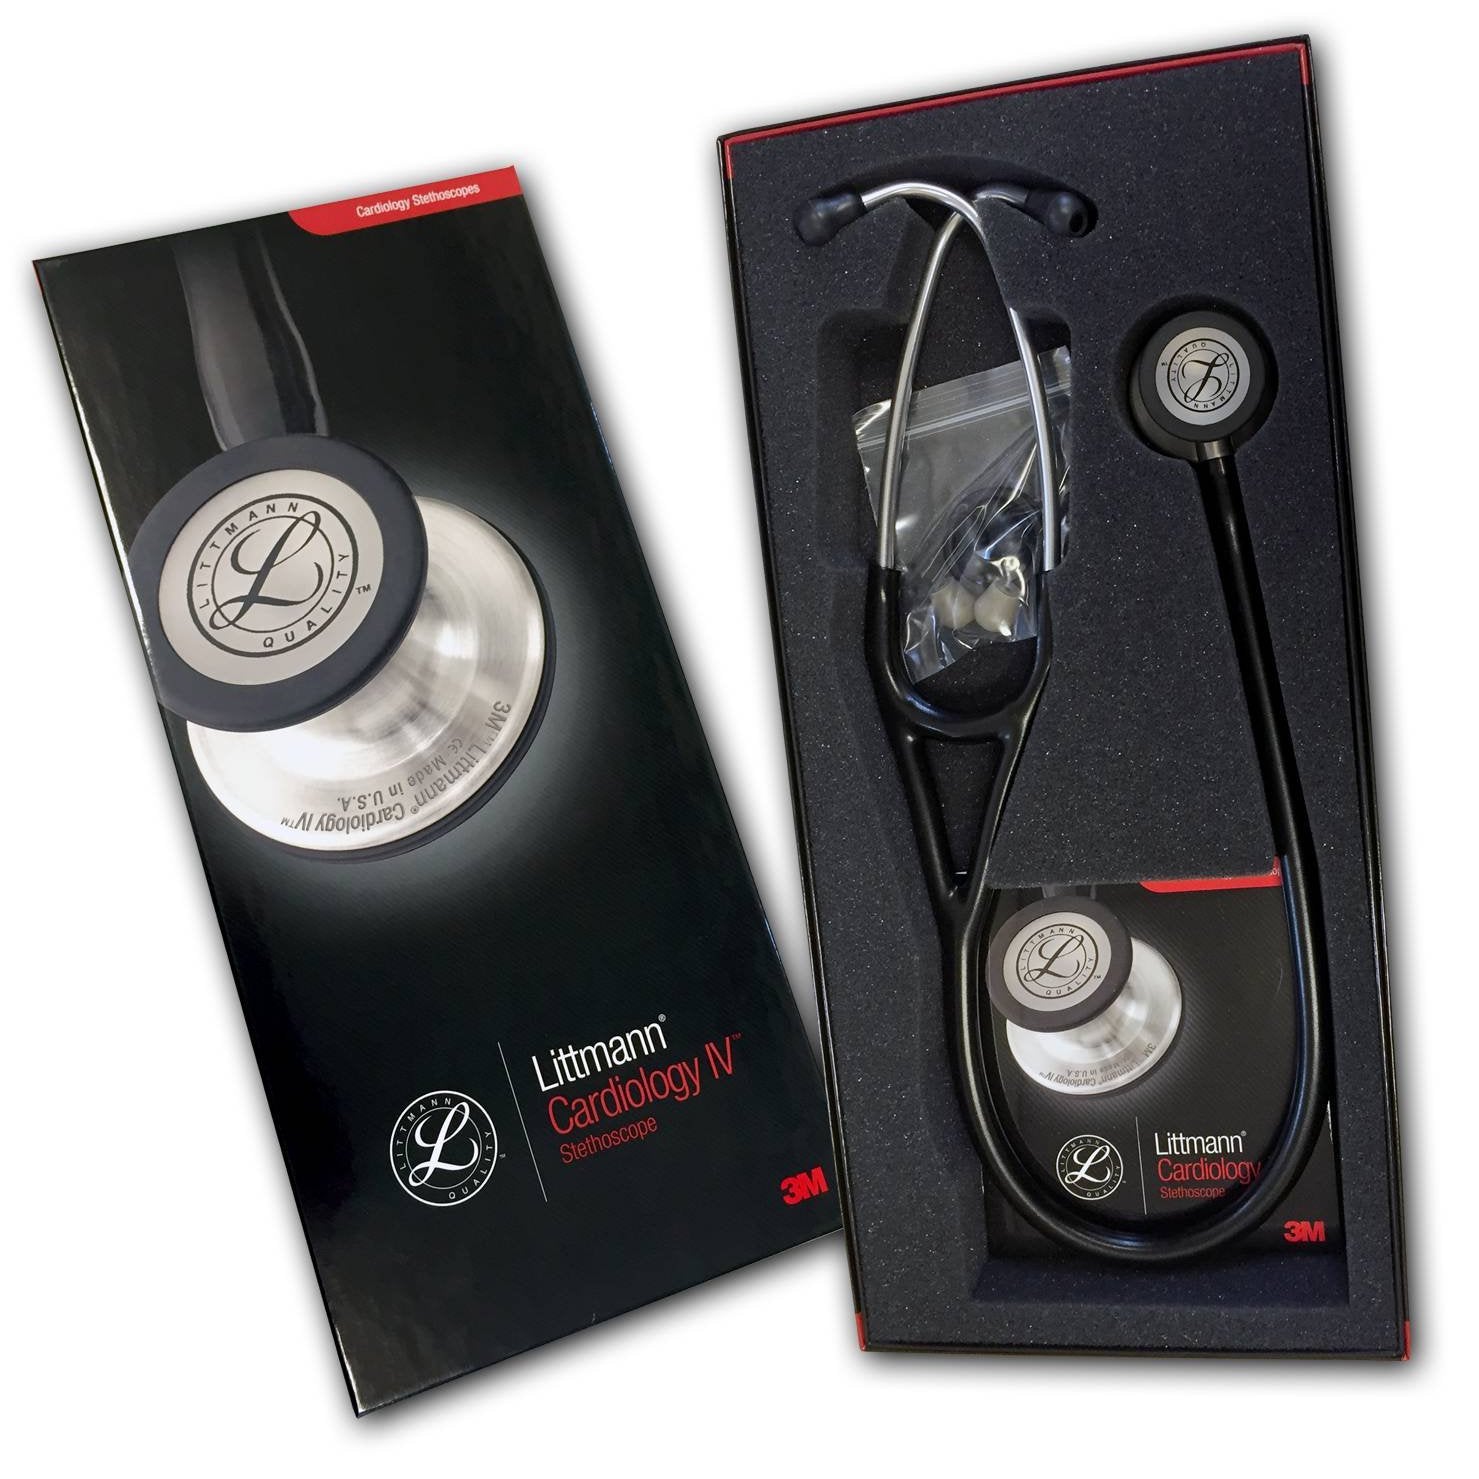 Professional Adult and Pediatric Two Sided Cardiology Stethoscope Black,  New in Box